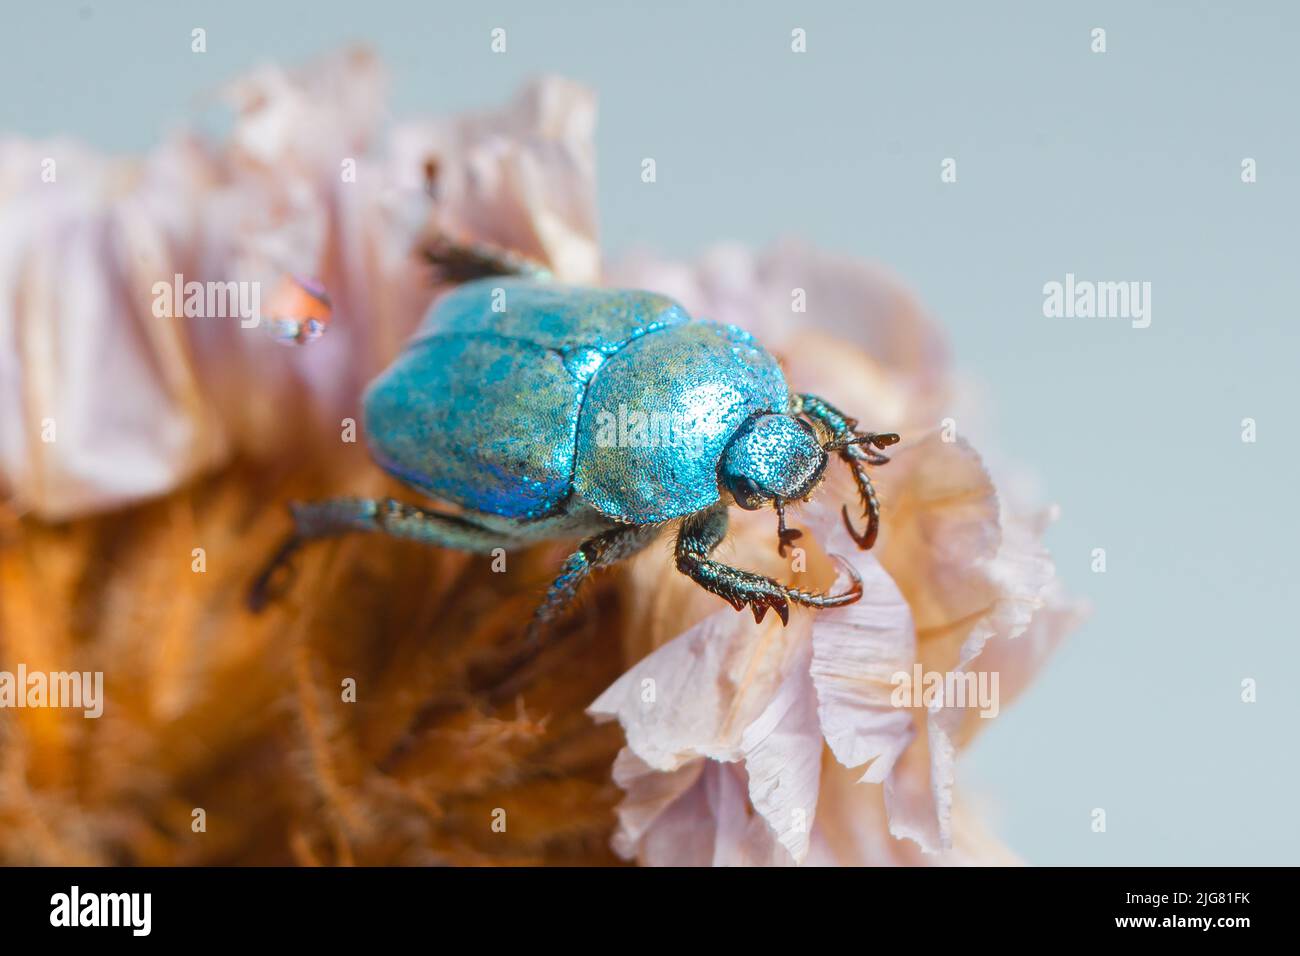 Blue brilliant beetle, Hoplia coerulea, in a flower. Close-up, macro with white background Stock Photo